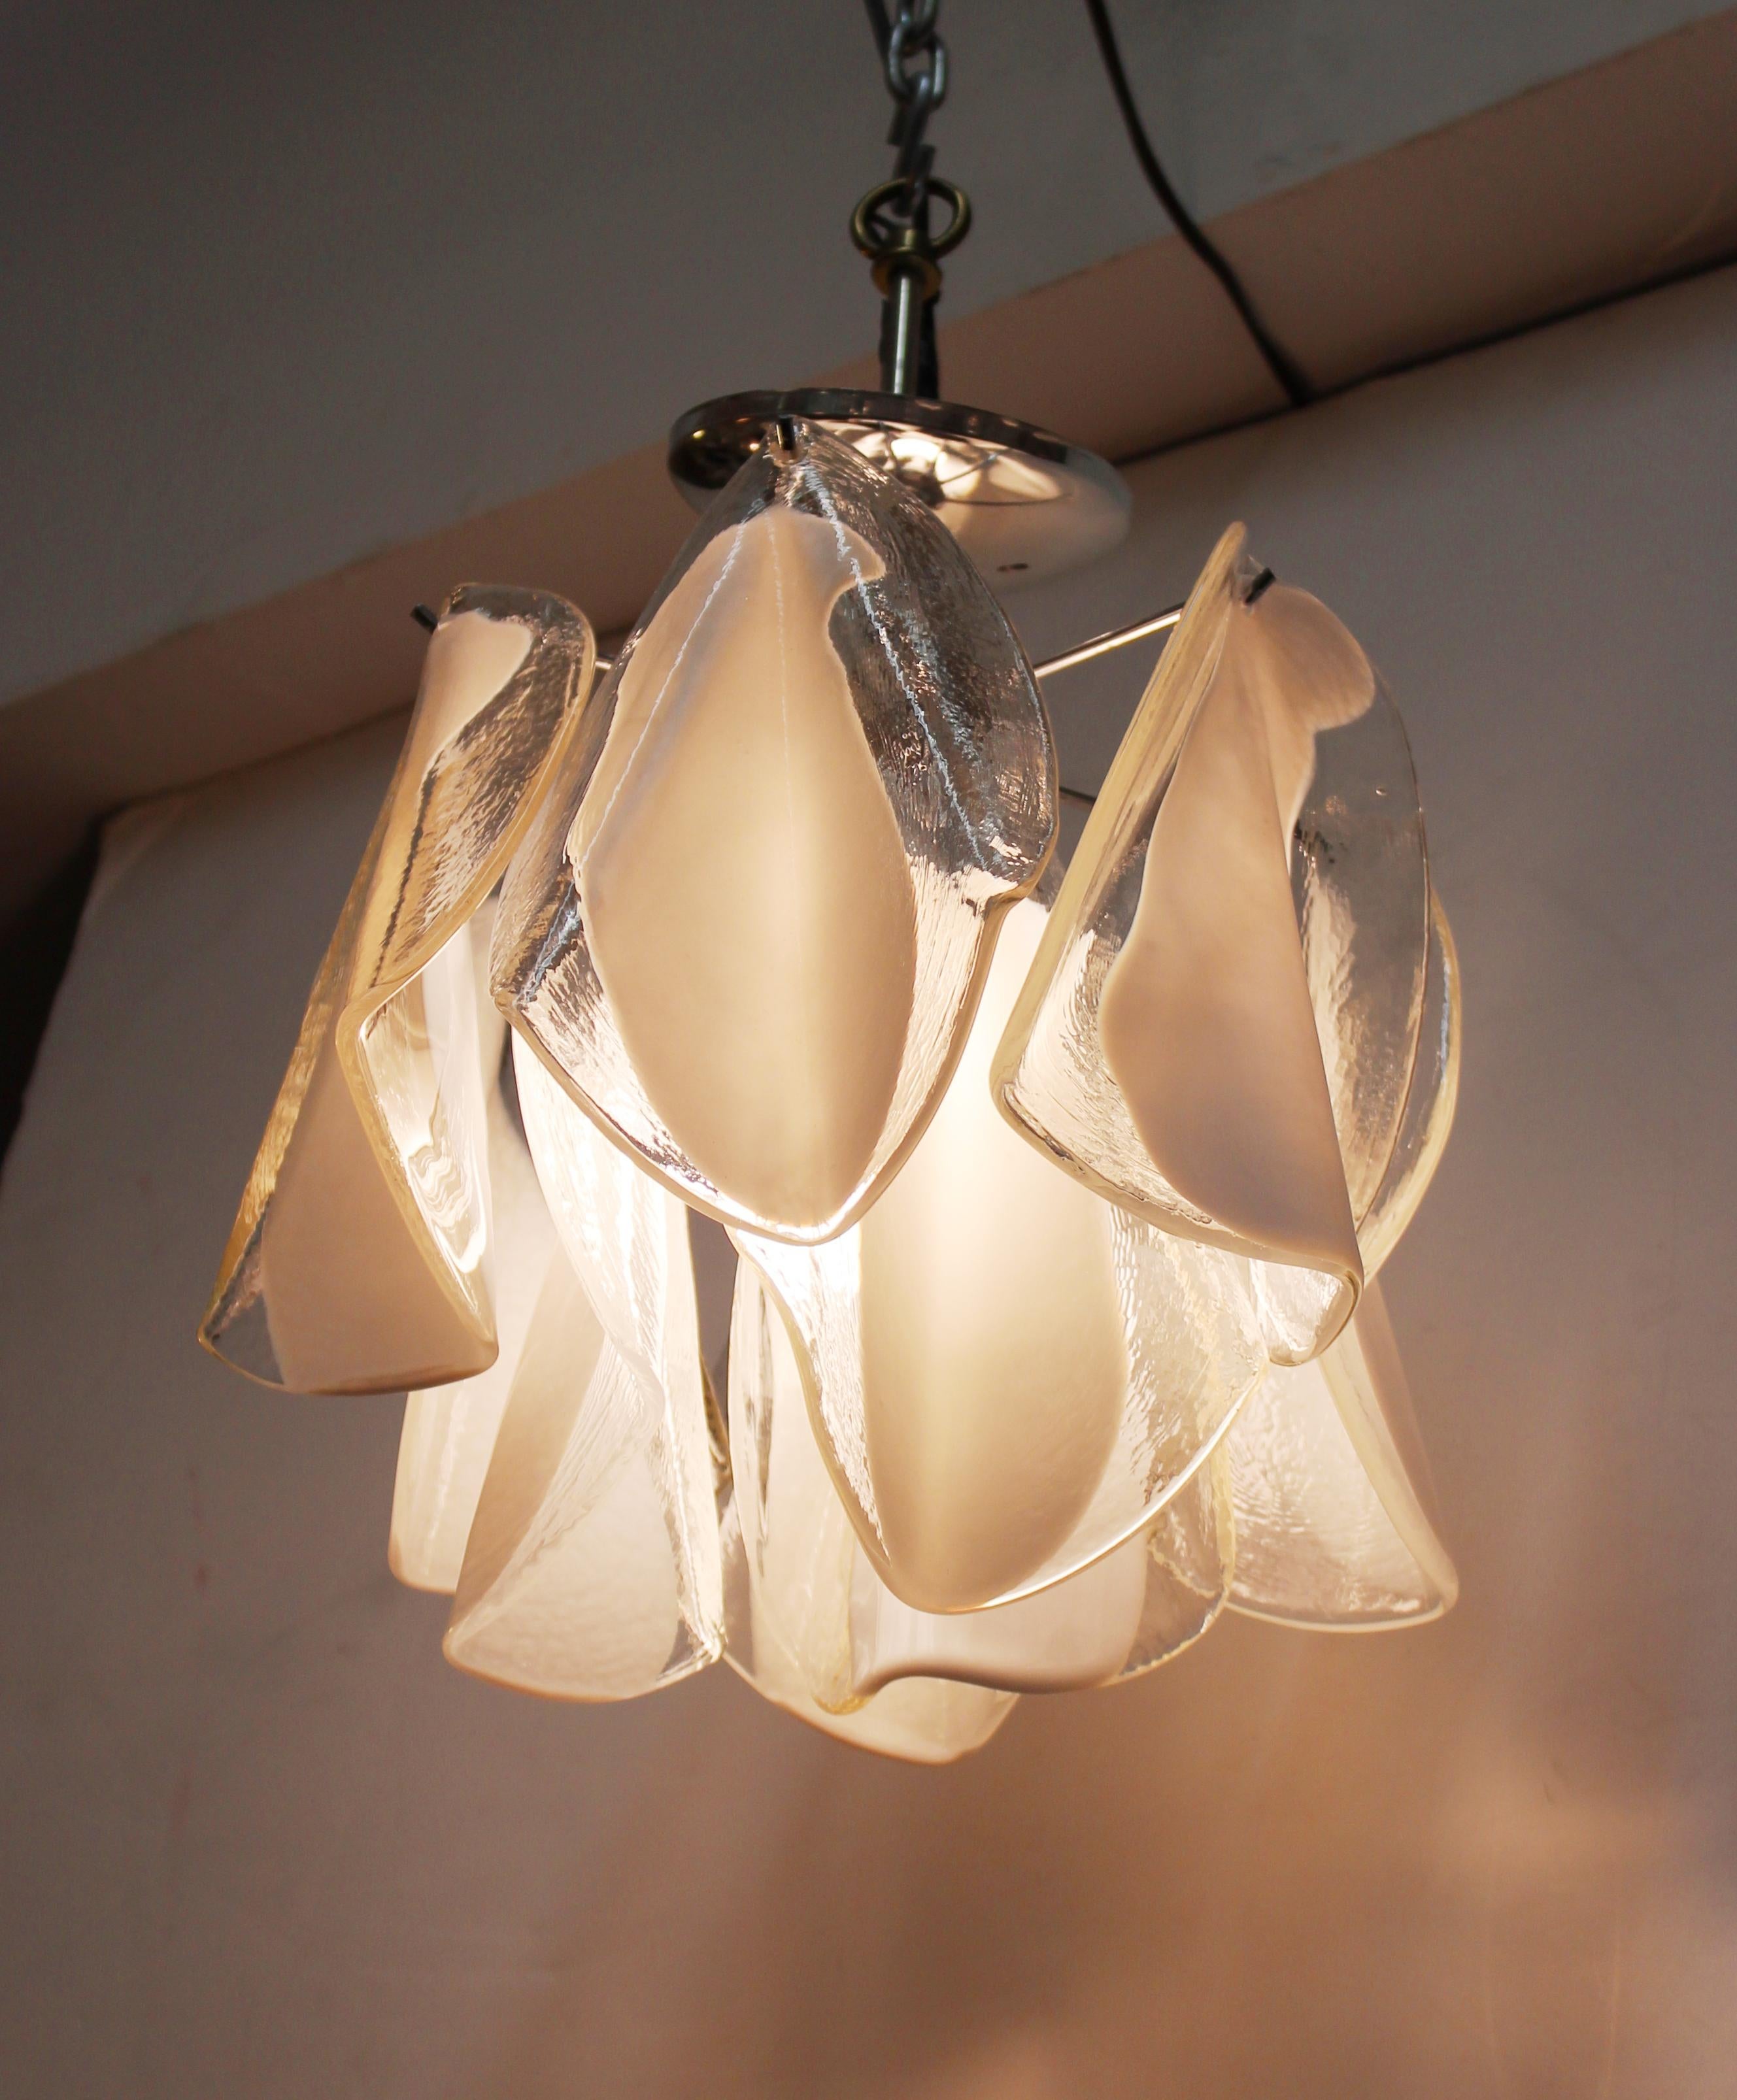 Italian modern diminutive glass handkerchief pendant light. The piece was made during the 1970s and takes one light bulb. In great vintage condition with age-appropriate wear.